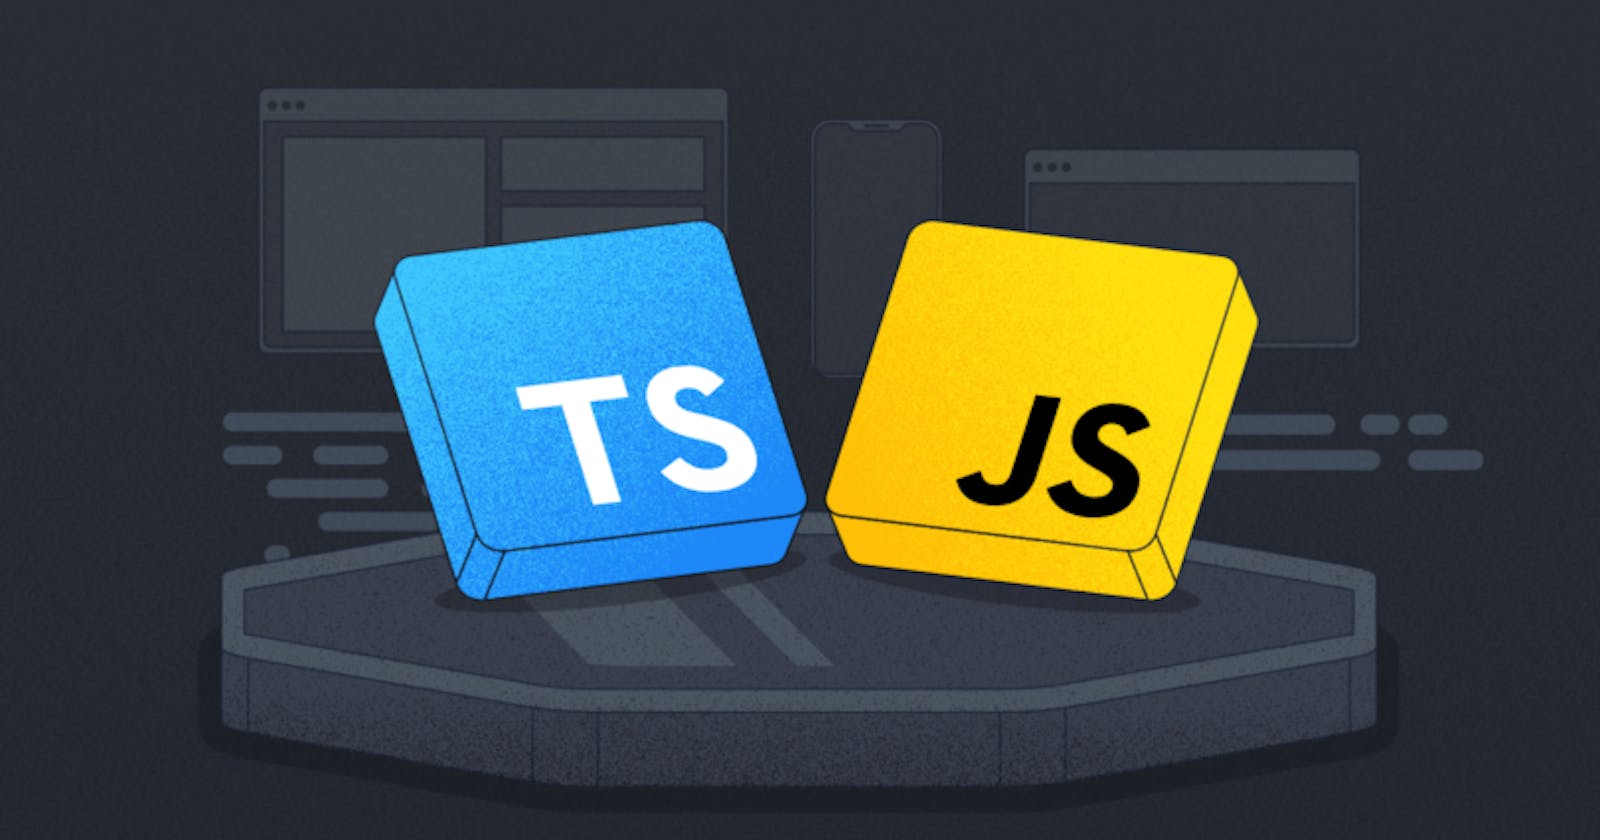 Typing your JavaScript without writing TypeScript